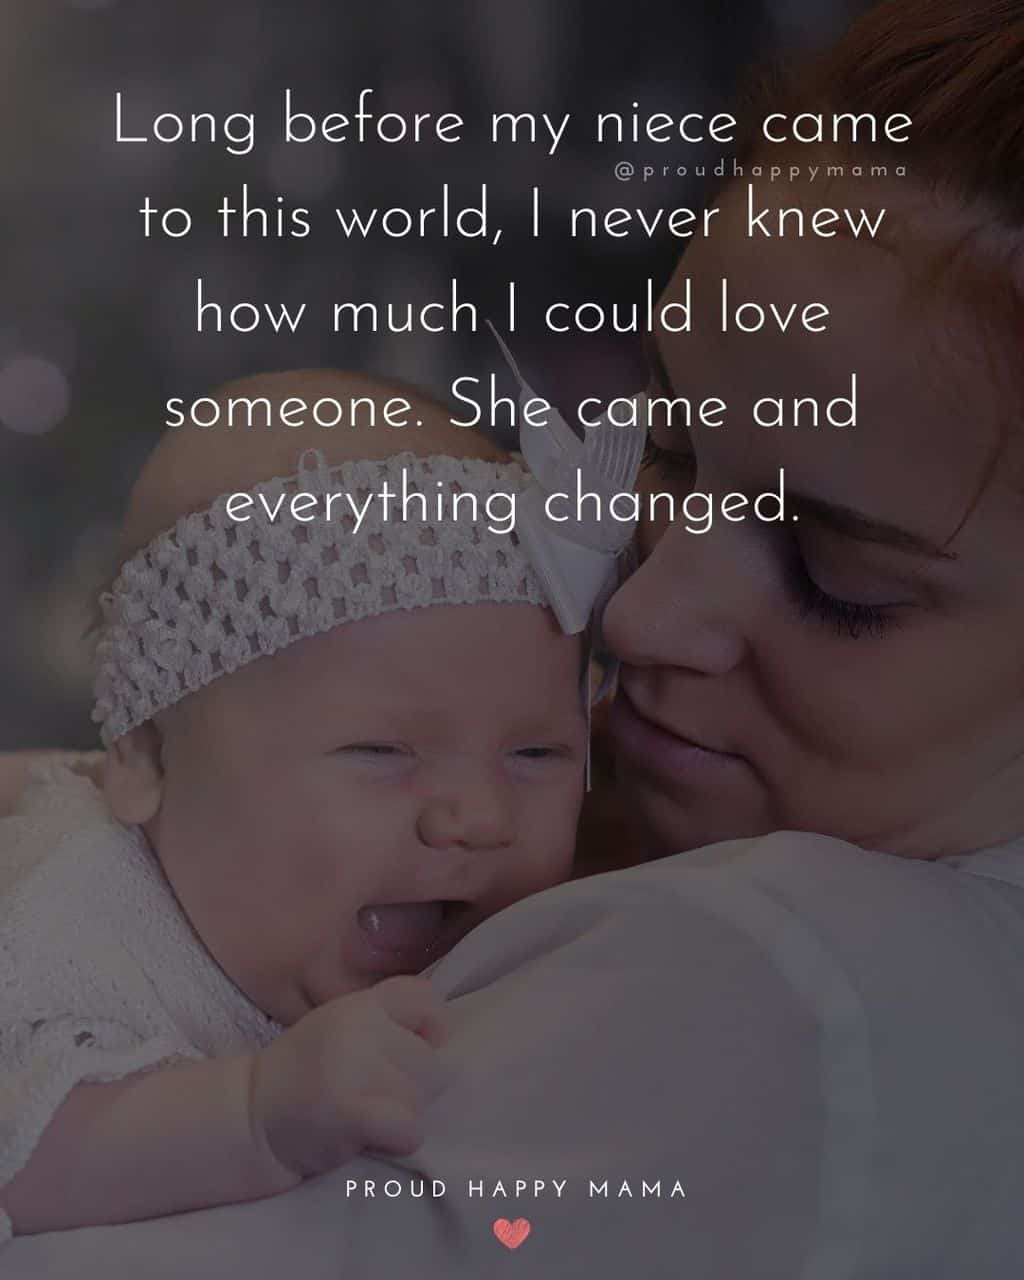 Niece Quotes - Long before my niece came to this world, I never knew how much I could love someone. She came and everything changed.